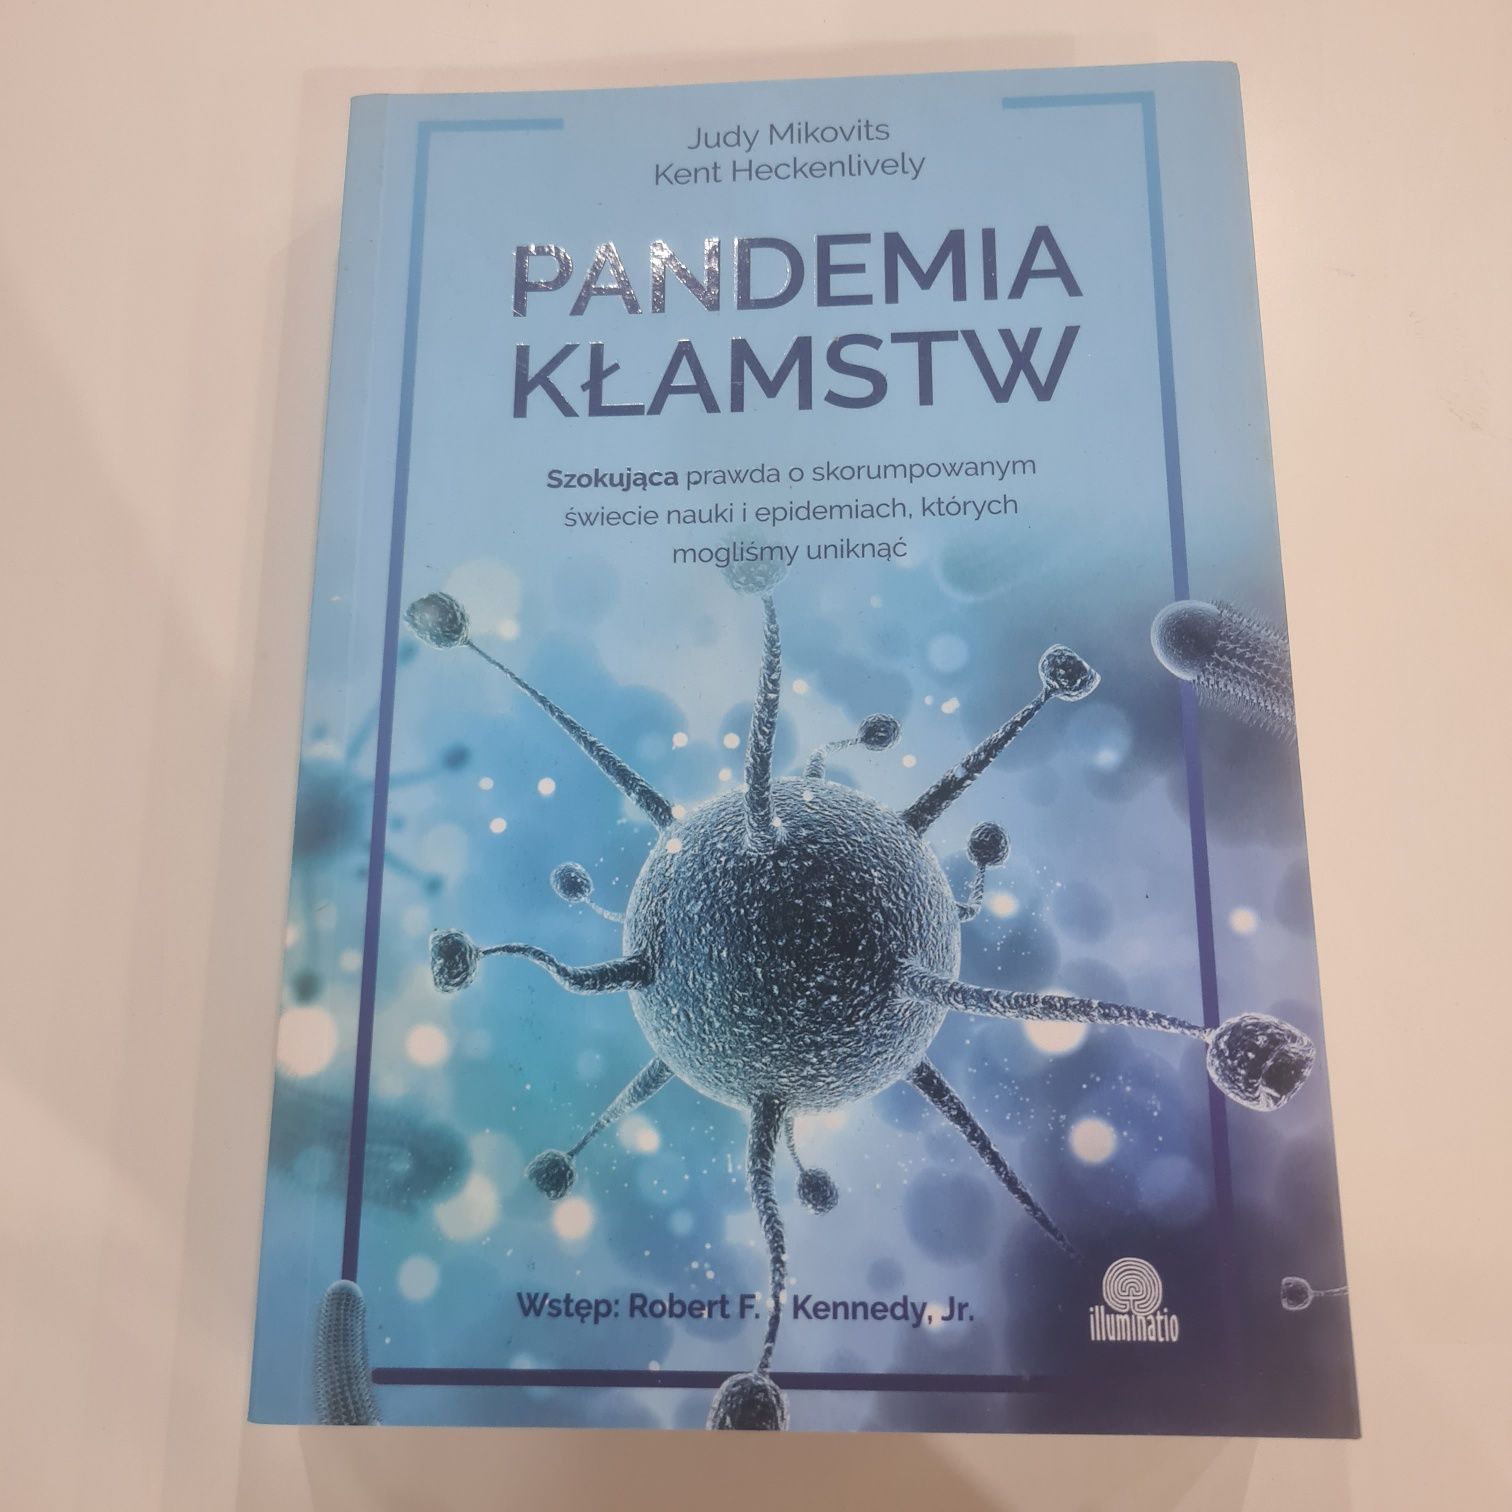 Pandemia kłamst, Judy Mikovits/Kent Heckenlively